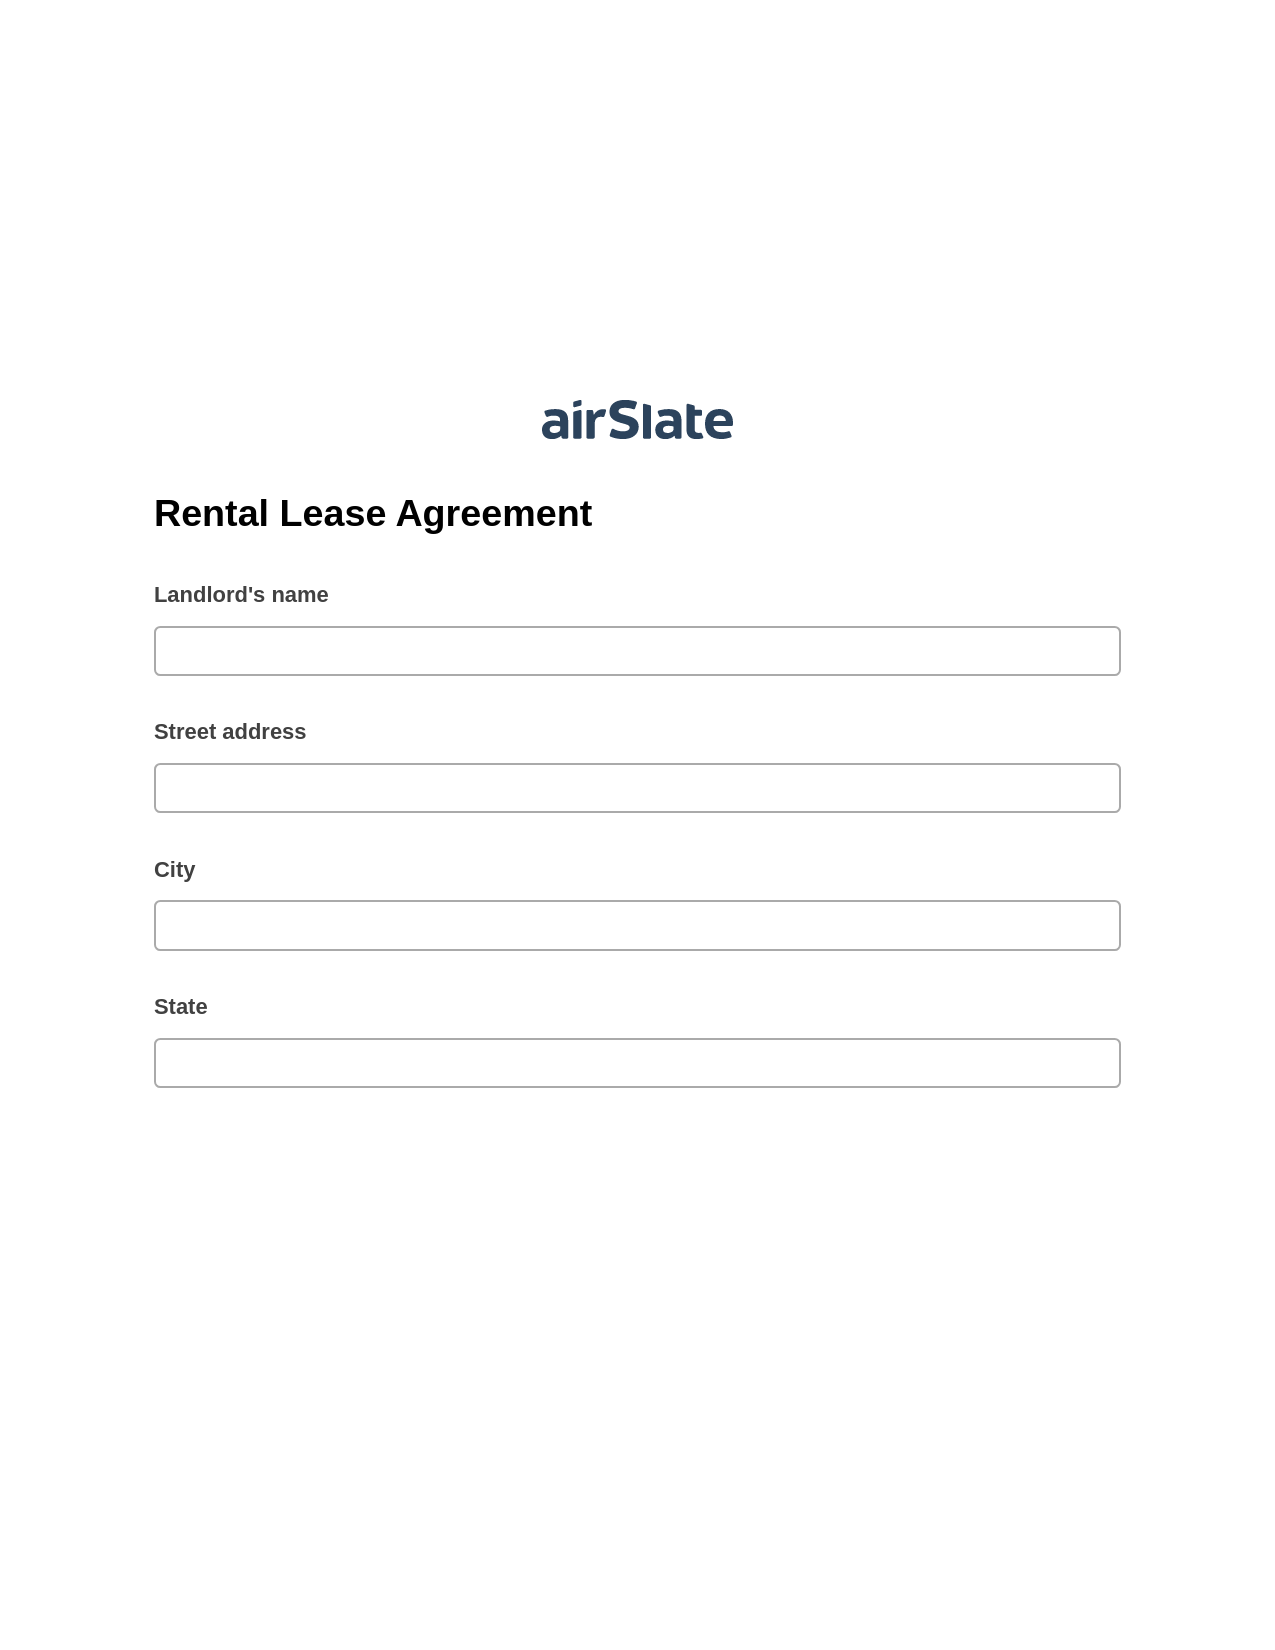 Multirole Rental Lease Agreement Pre-fill Slate from MS Dynamics 365 Records Bot, Open as Role Bot, Export to Excel 365 Bot